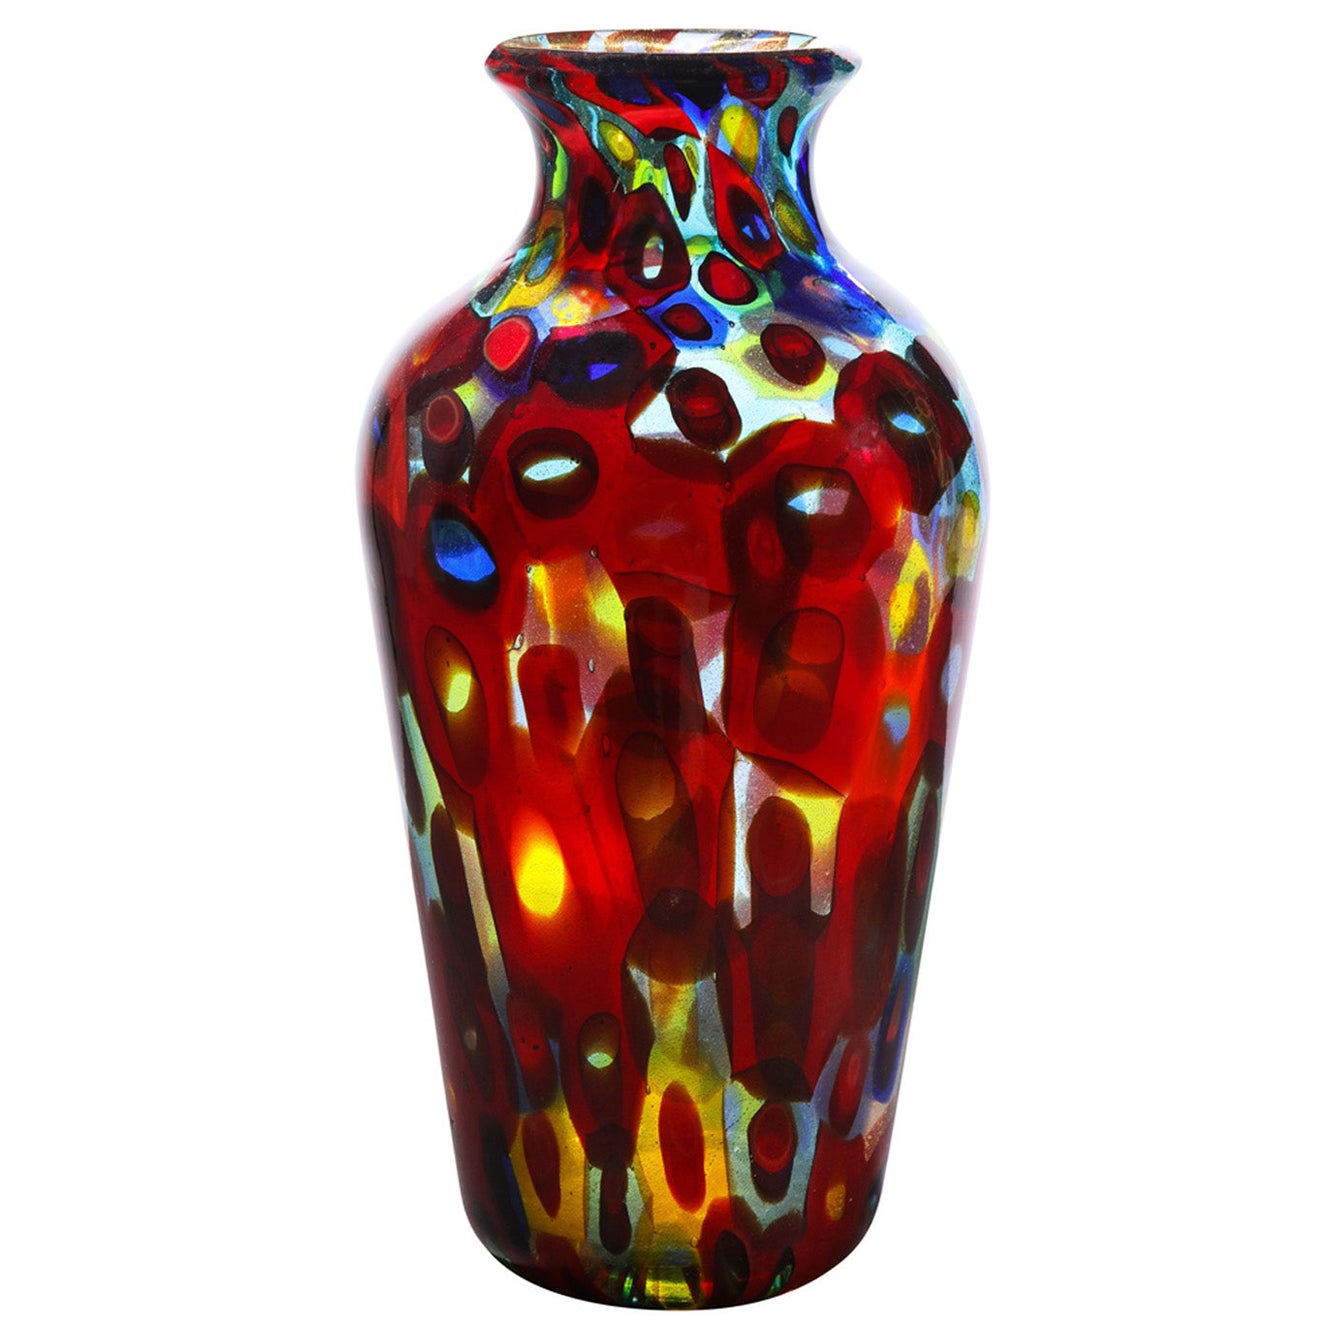 Handblown Glass Vase with Large Murrhines by Anzolo Fuga for A.V.E.M, 1950s For Sale